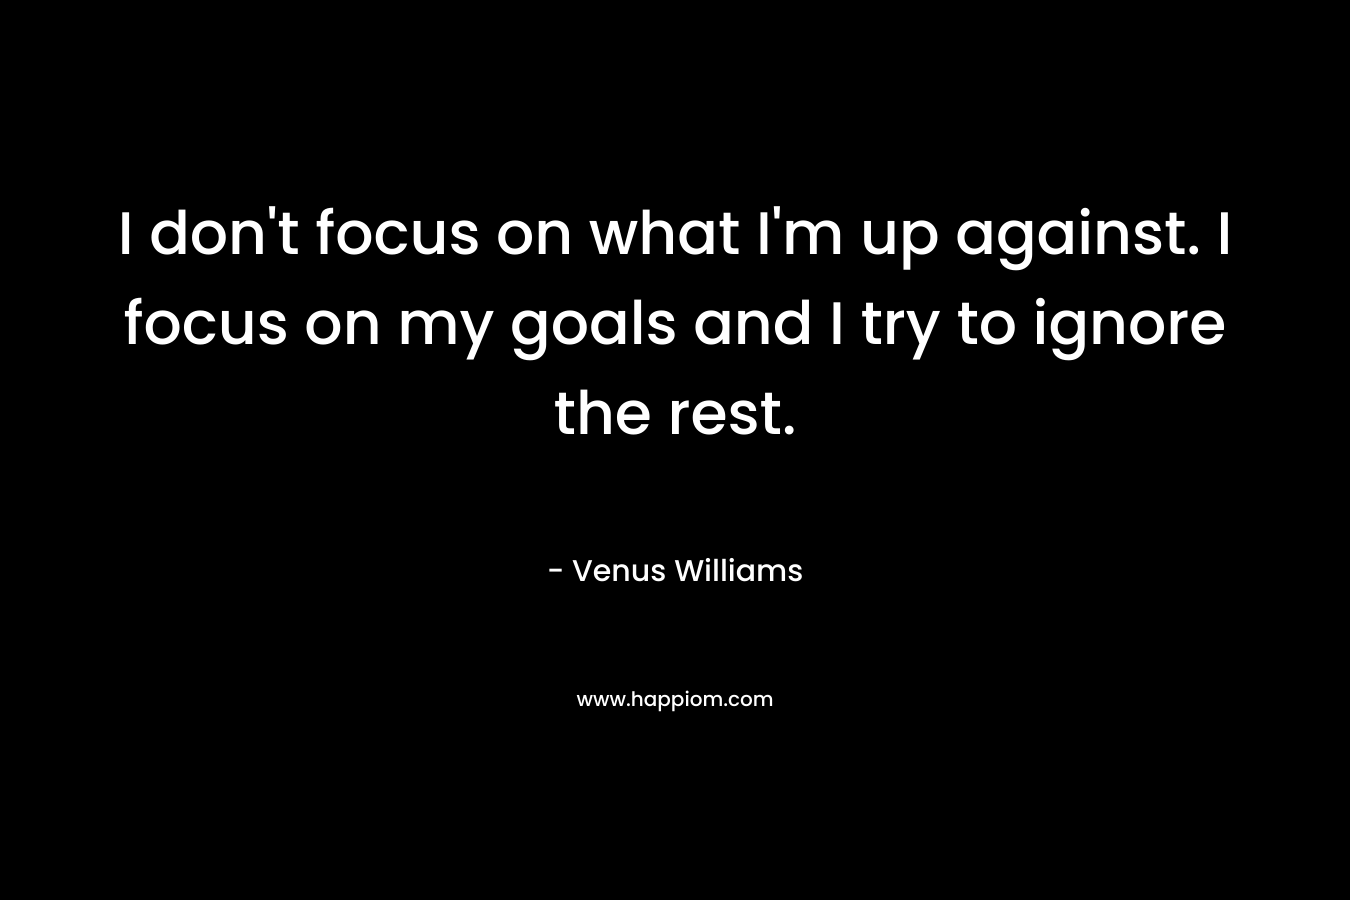 I don't focus on what I'm up against. I focus on my goals and I try to ignore the rest.